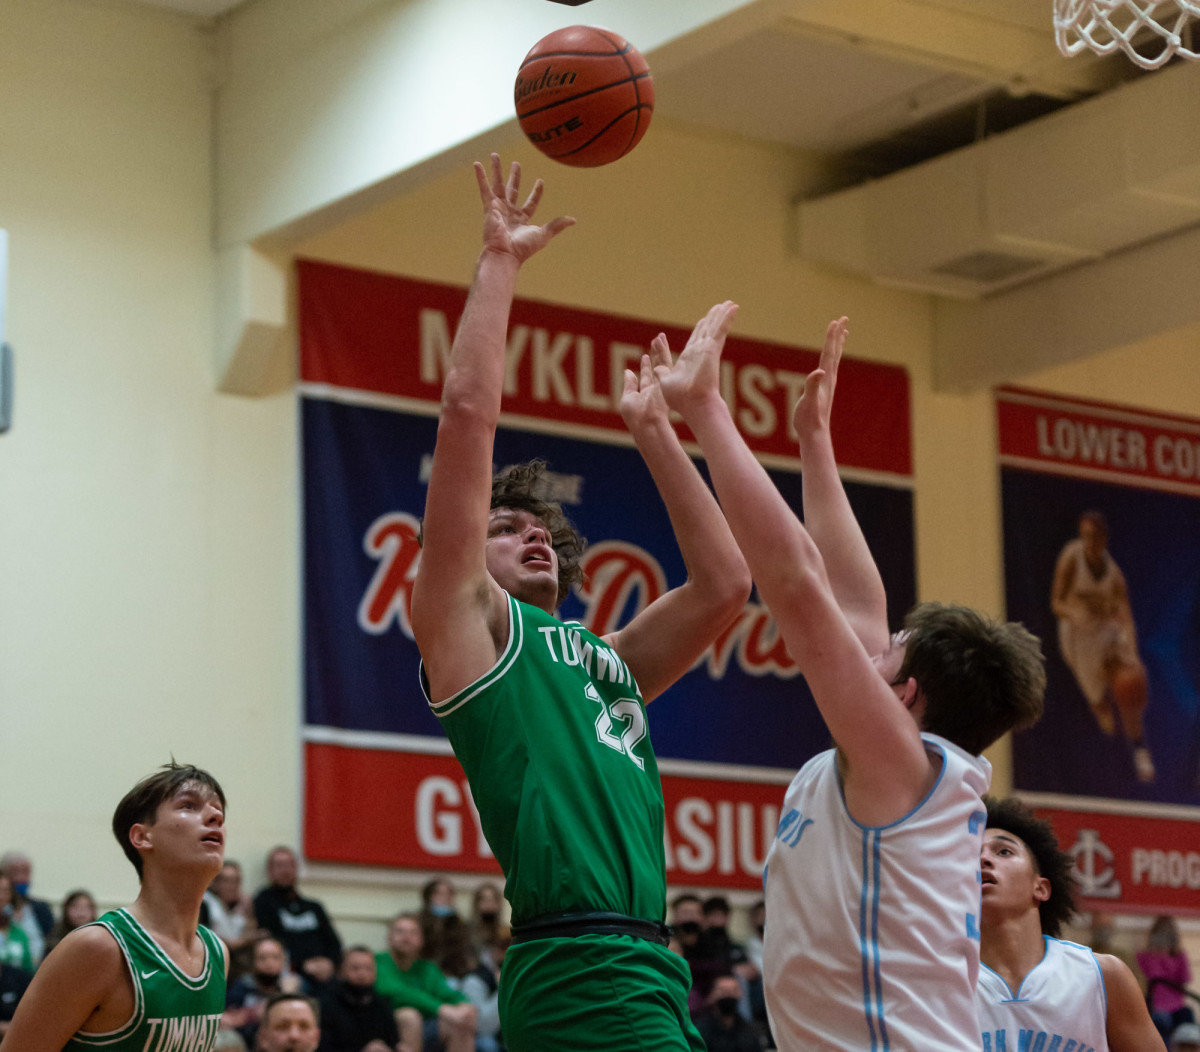 Tumwater's Ryan Otton shoots in a Lower Columbia College's Martin Luther King Jr. Tribute game on Monday, Jan. 17, 2022, at Myklebust Gymnasium in Longview. Tumwater won 64-52 over Mark Morris. (Joshua Hart/For ScorebookLive)